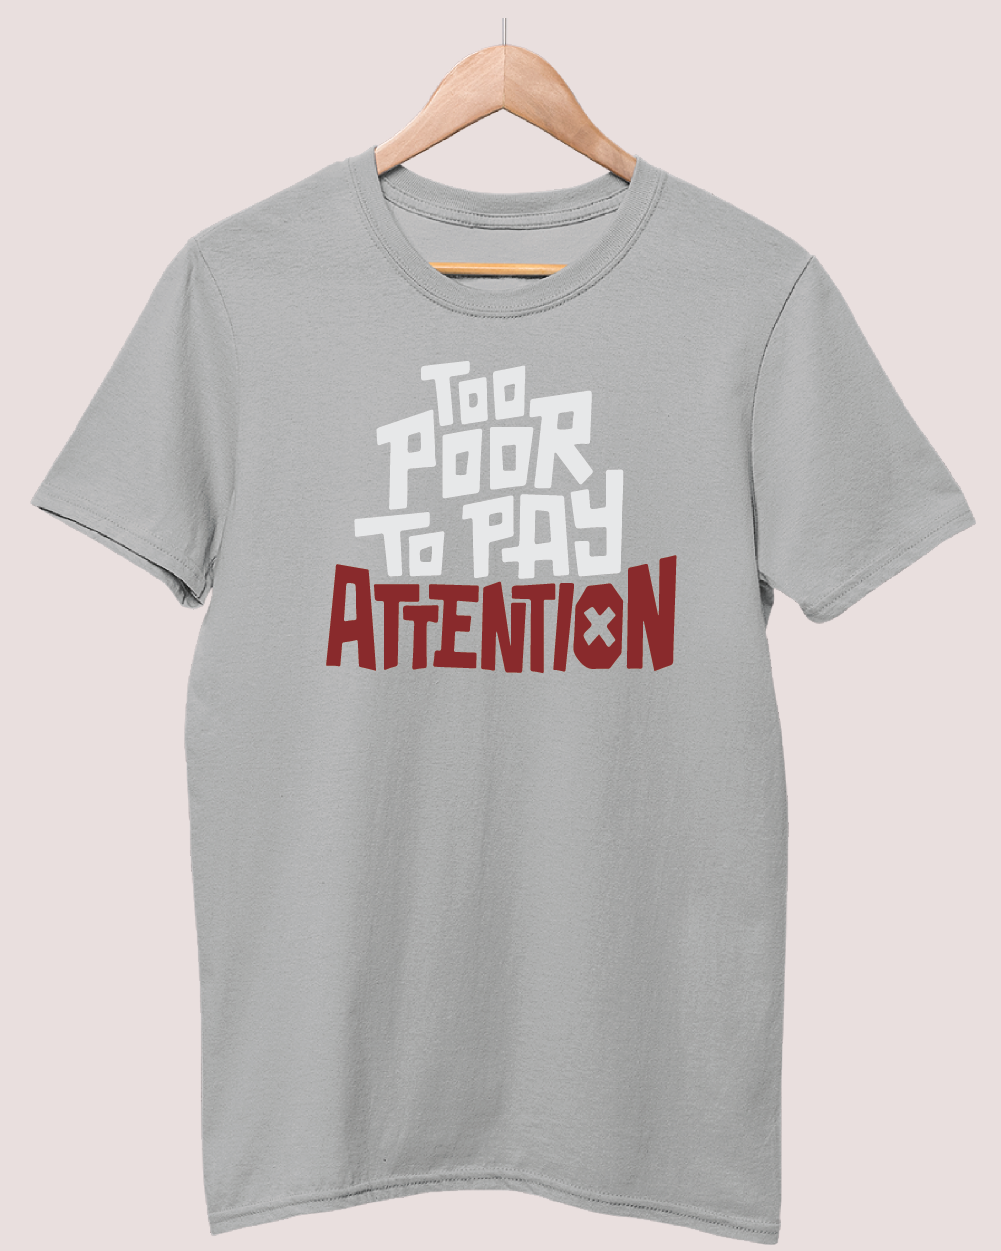 Too Poor To Pay Attention t-shirt